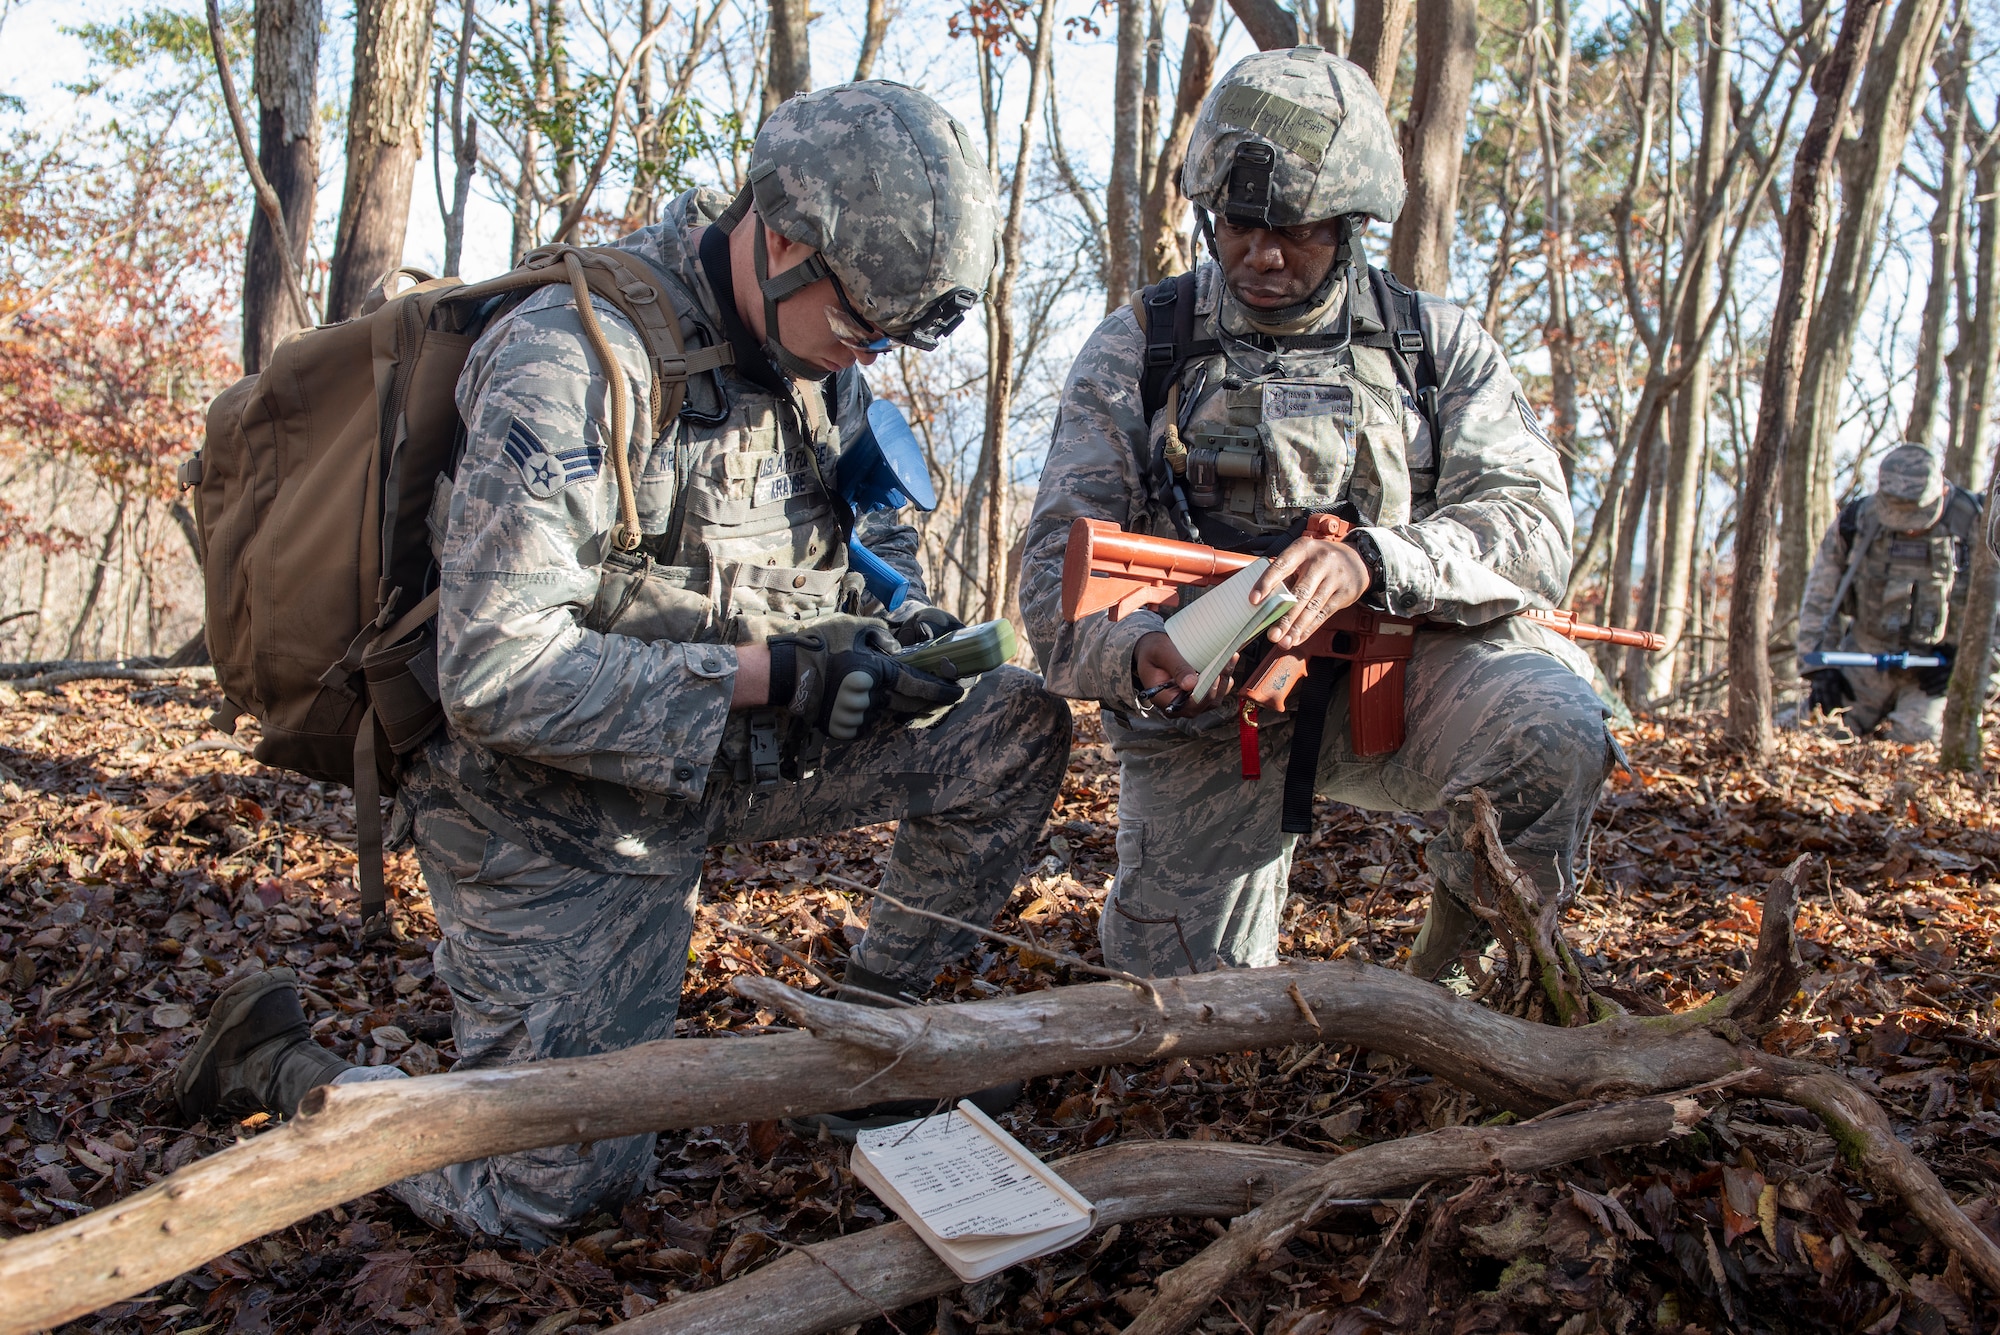 Senior Airman Mitchell Krause, 374th Security Forces Squadron patrolman, left, and Staff Sgt. Rayon McDonald 374 SFS flight chief, right, utilize a Defense Advanced GPS Receiver (DAGR) to mark coordinates in a notebook during a field training exercise at Camp Fuji, Japan, Nov. 8, 2018.